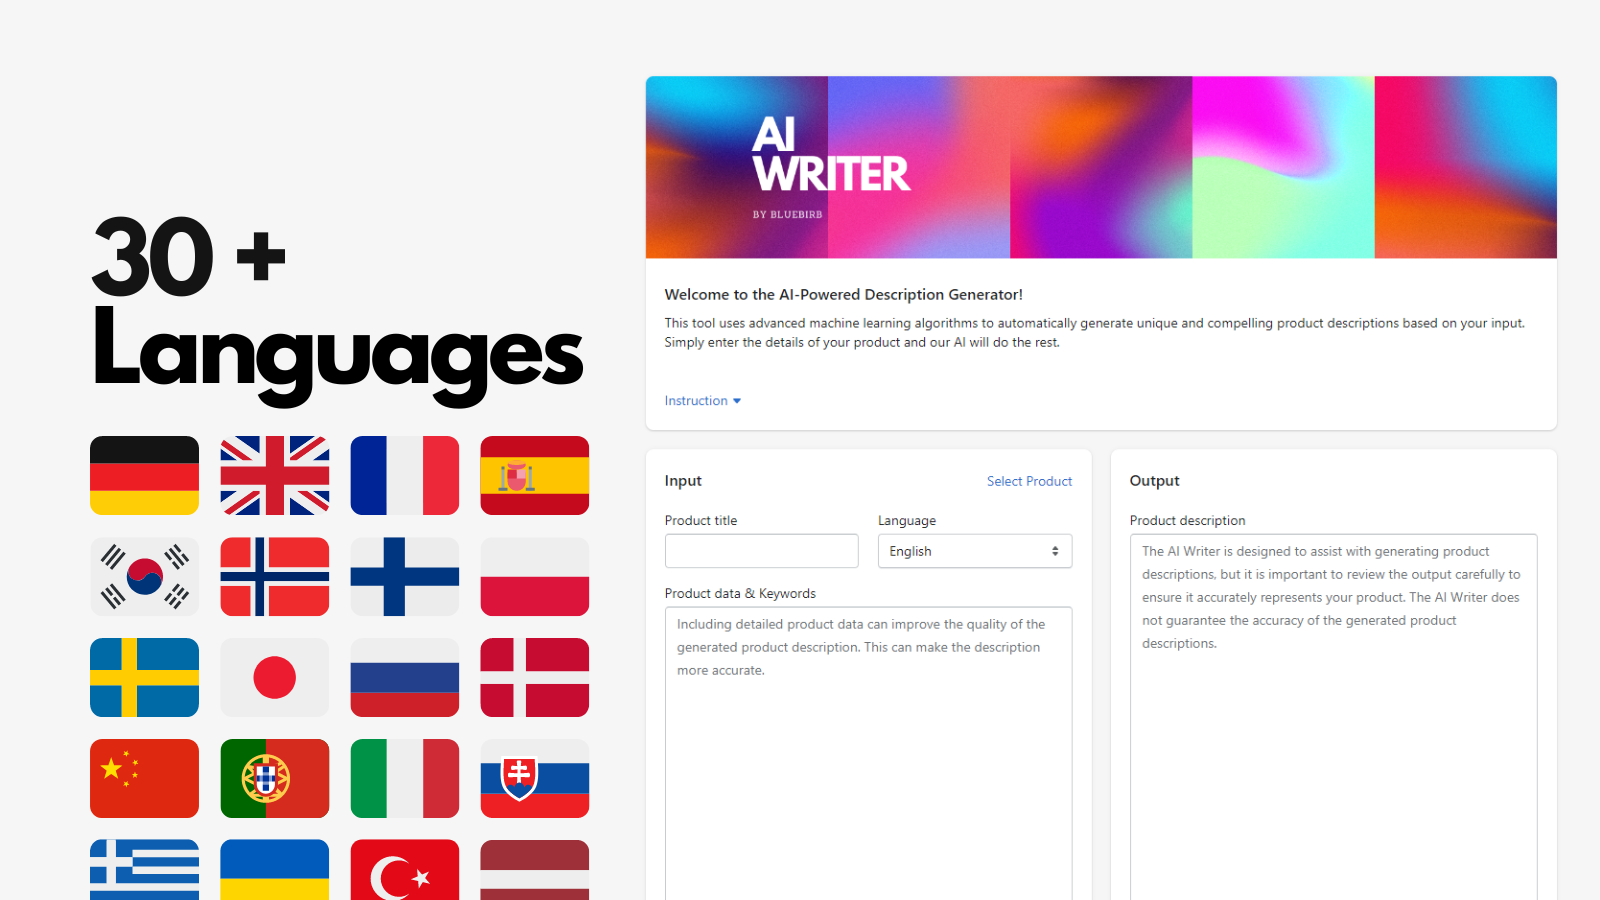 BlueBirb's AI Writer supports 30+ Languages